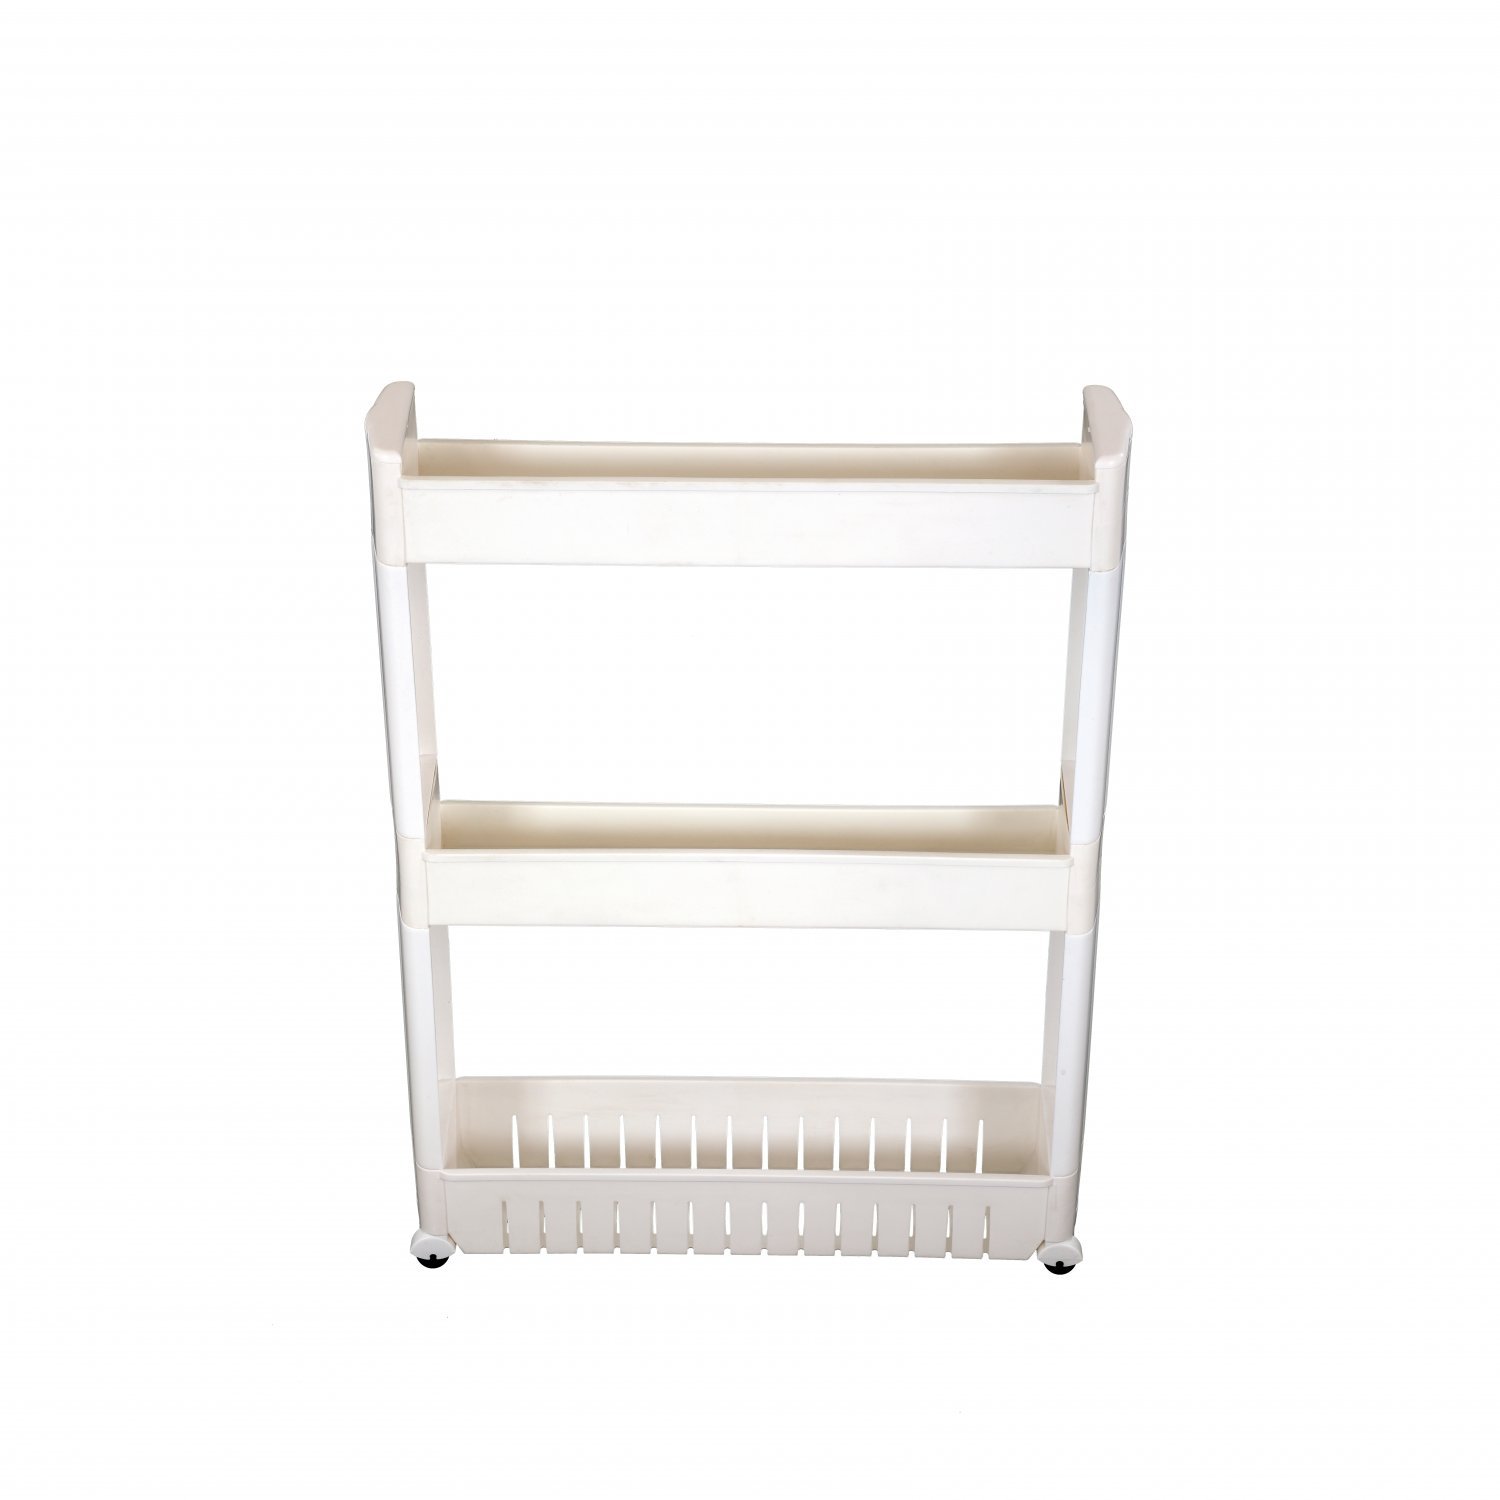 3 Tier Slide Out Kitchen Trolley Rack Storage Organiser Moving Wall Cabinets Tower Holder Bathroom Shelf with Wheels 